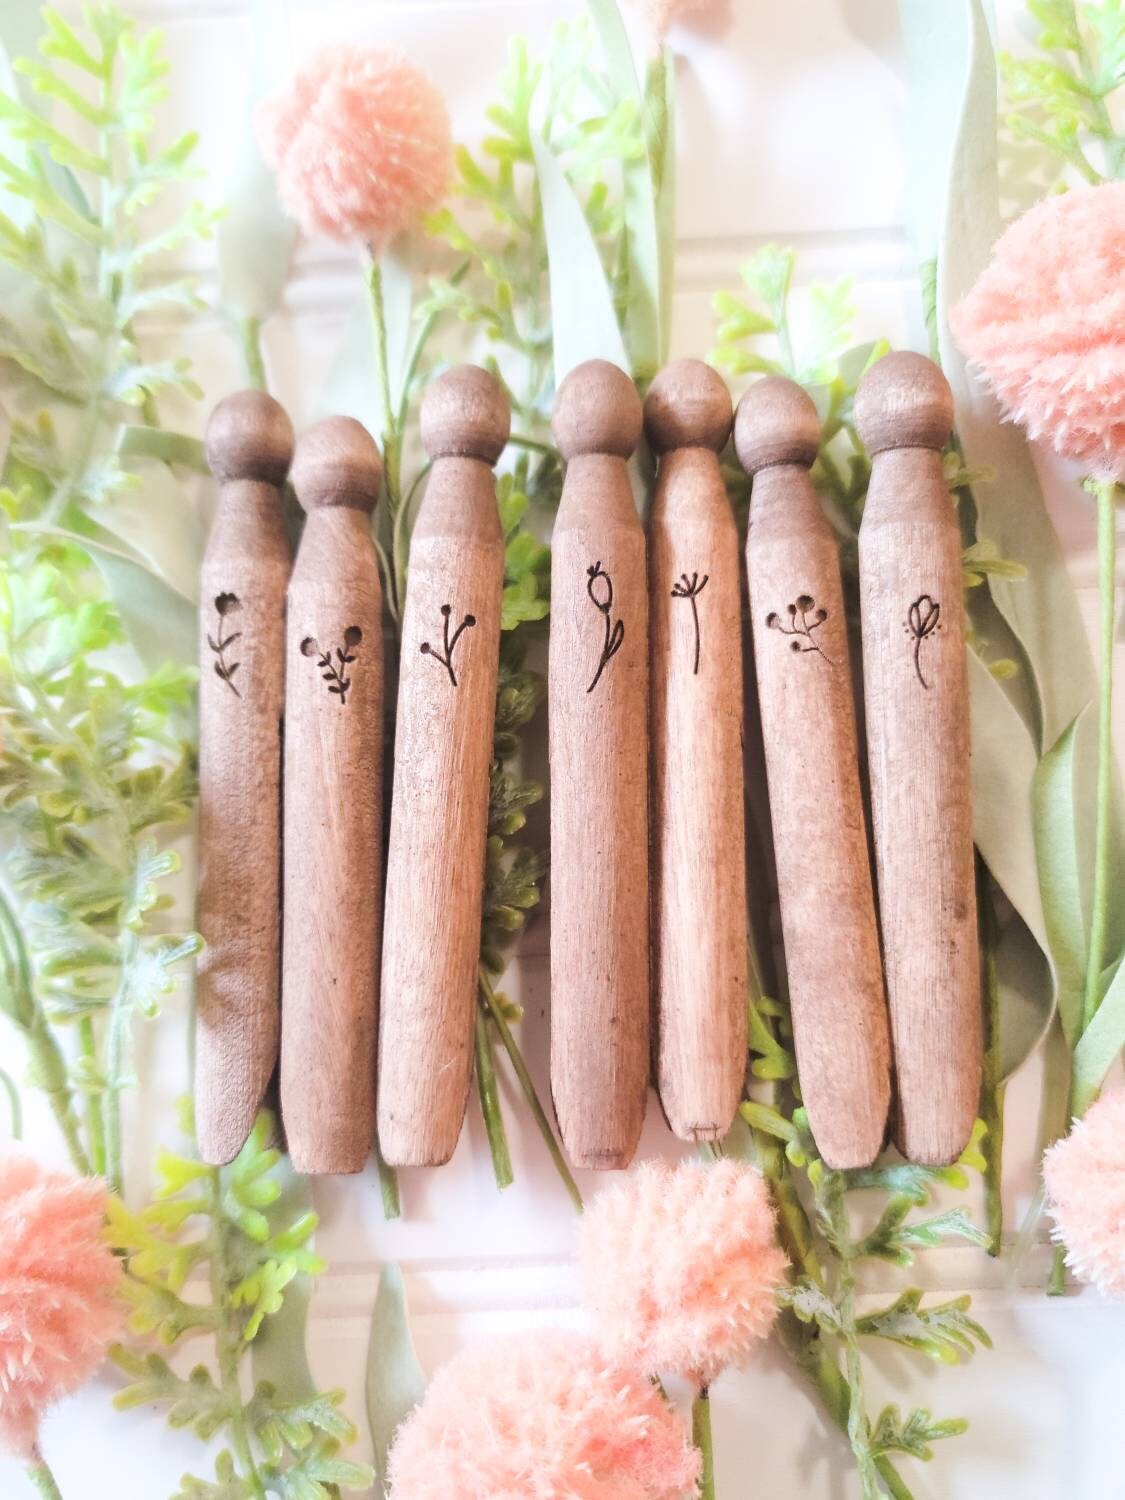 Vintage Inspired Clothespins, Set of 9, Numbered, Old Clothespins, Old  Fashioned Round Wooden Clothespins, Vintage Decor 